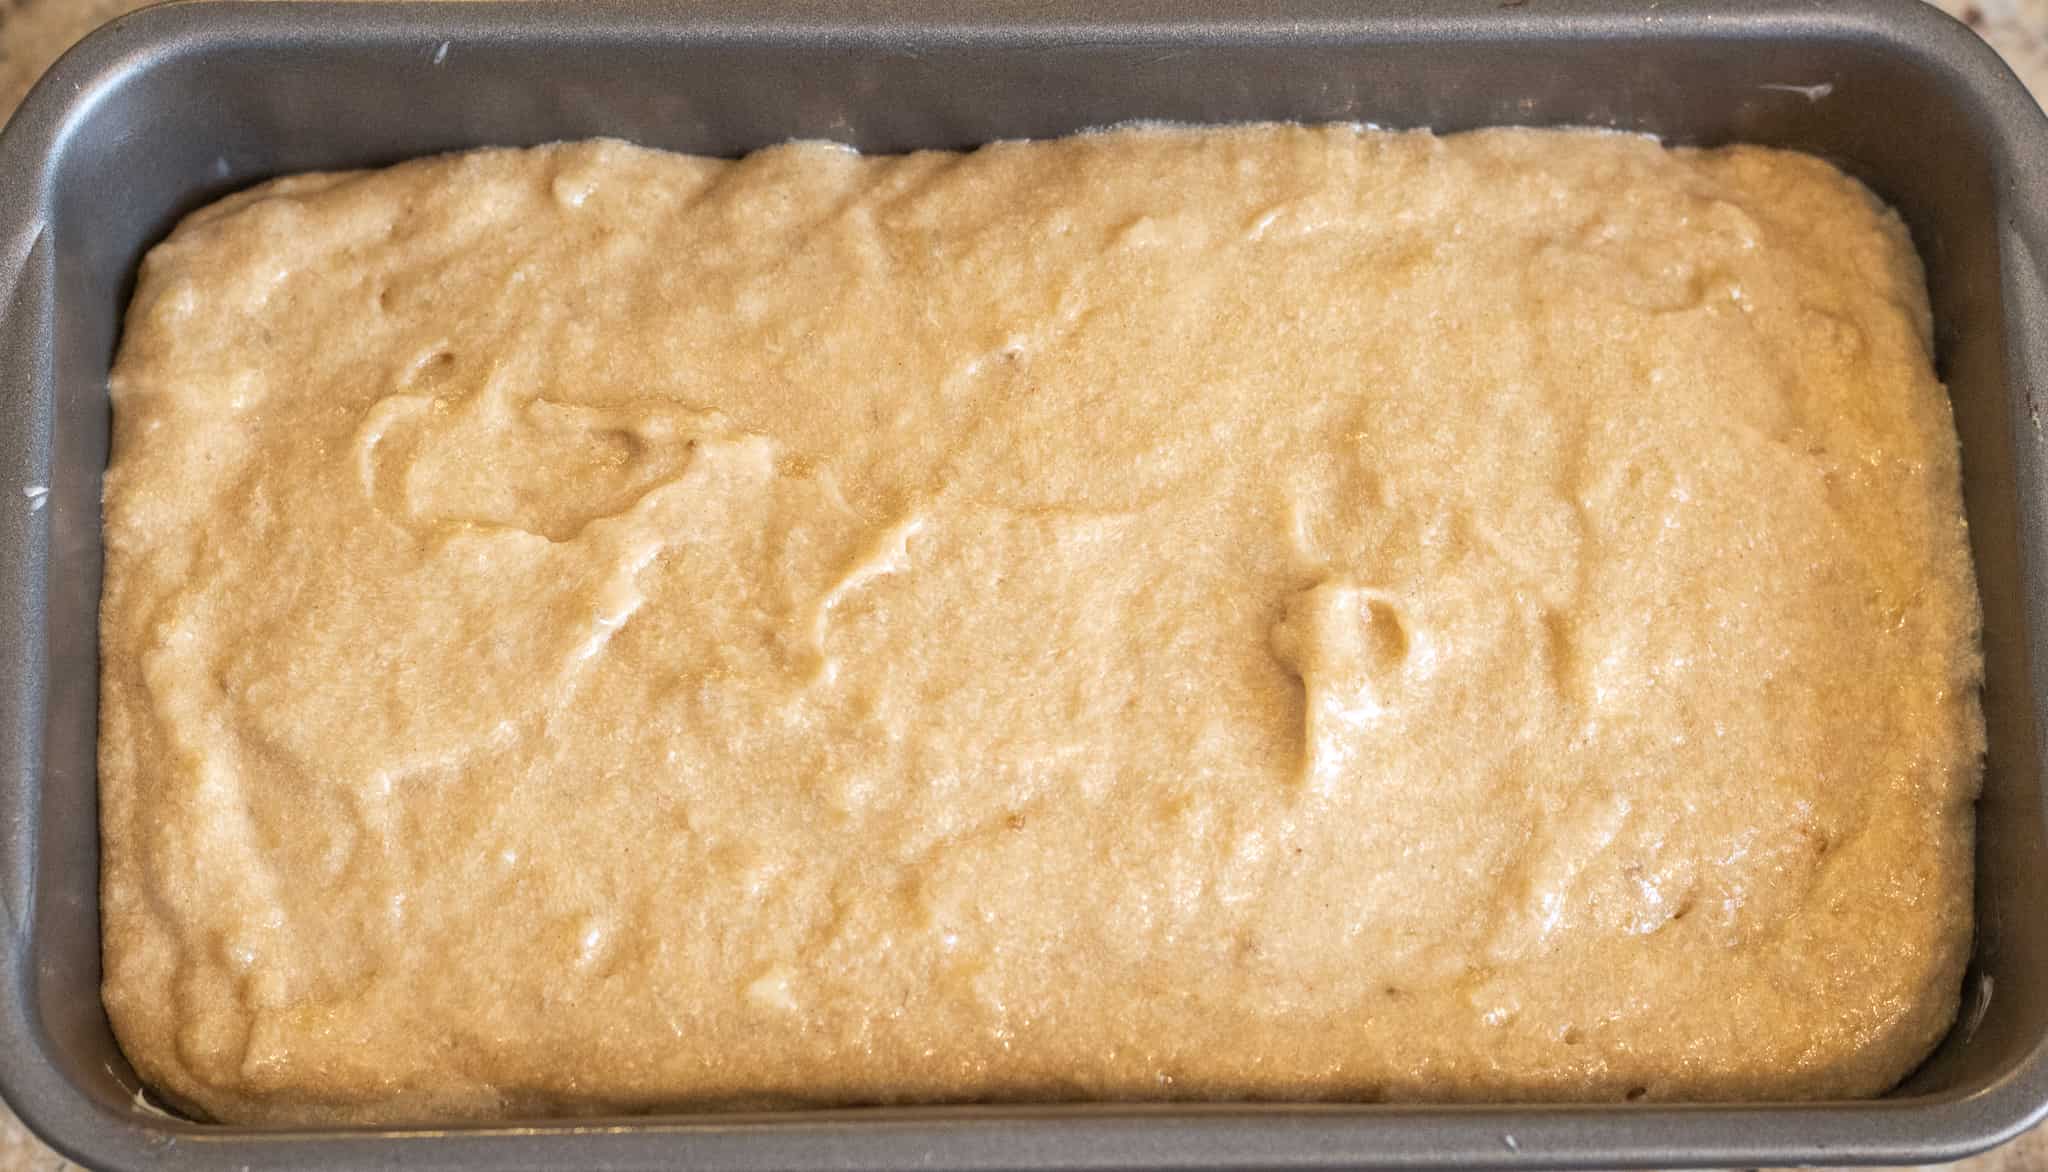 Uncooked banana bread batter in a metal loaf pan.